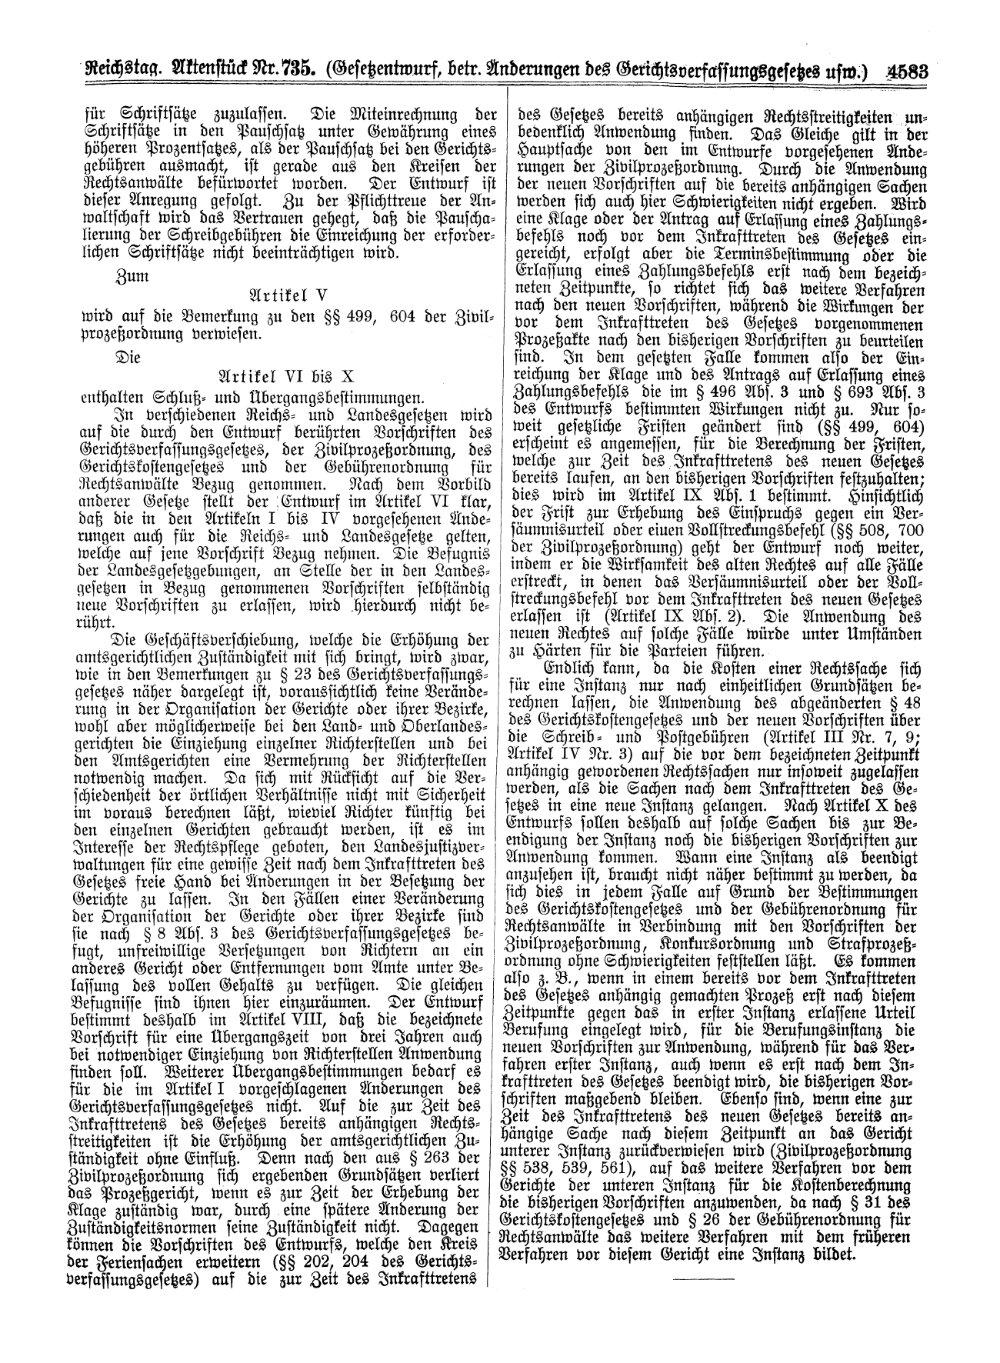 Scan of page 4583